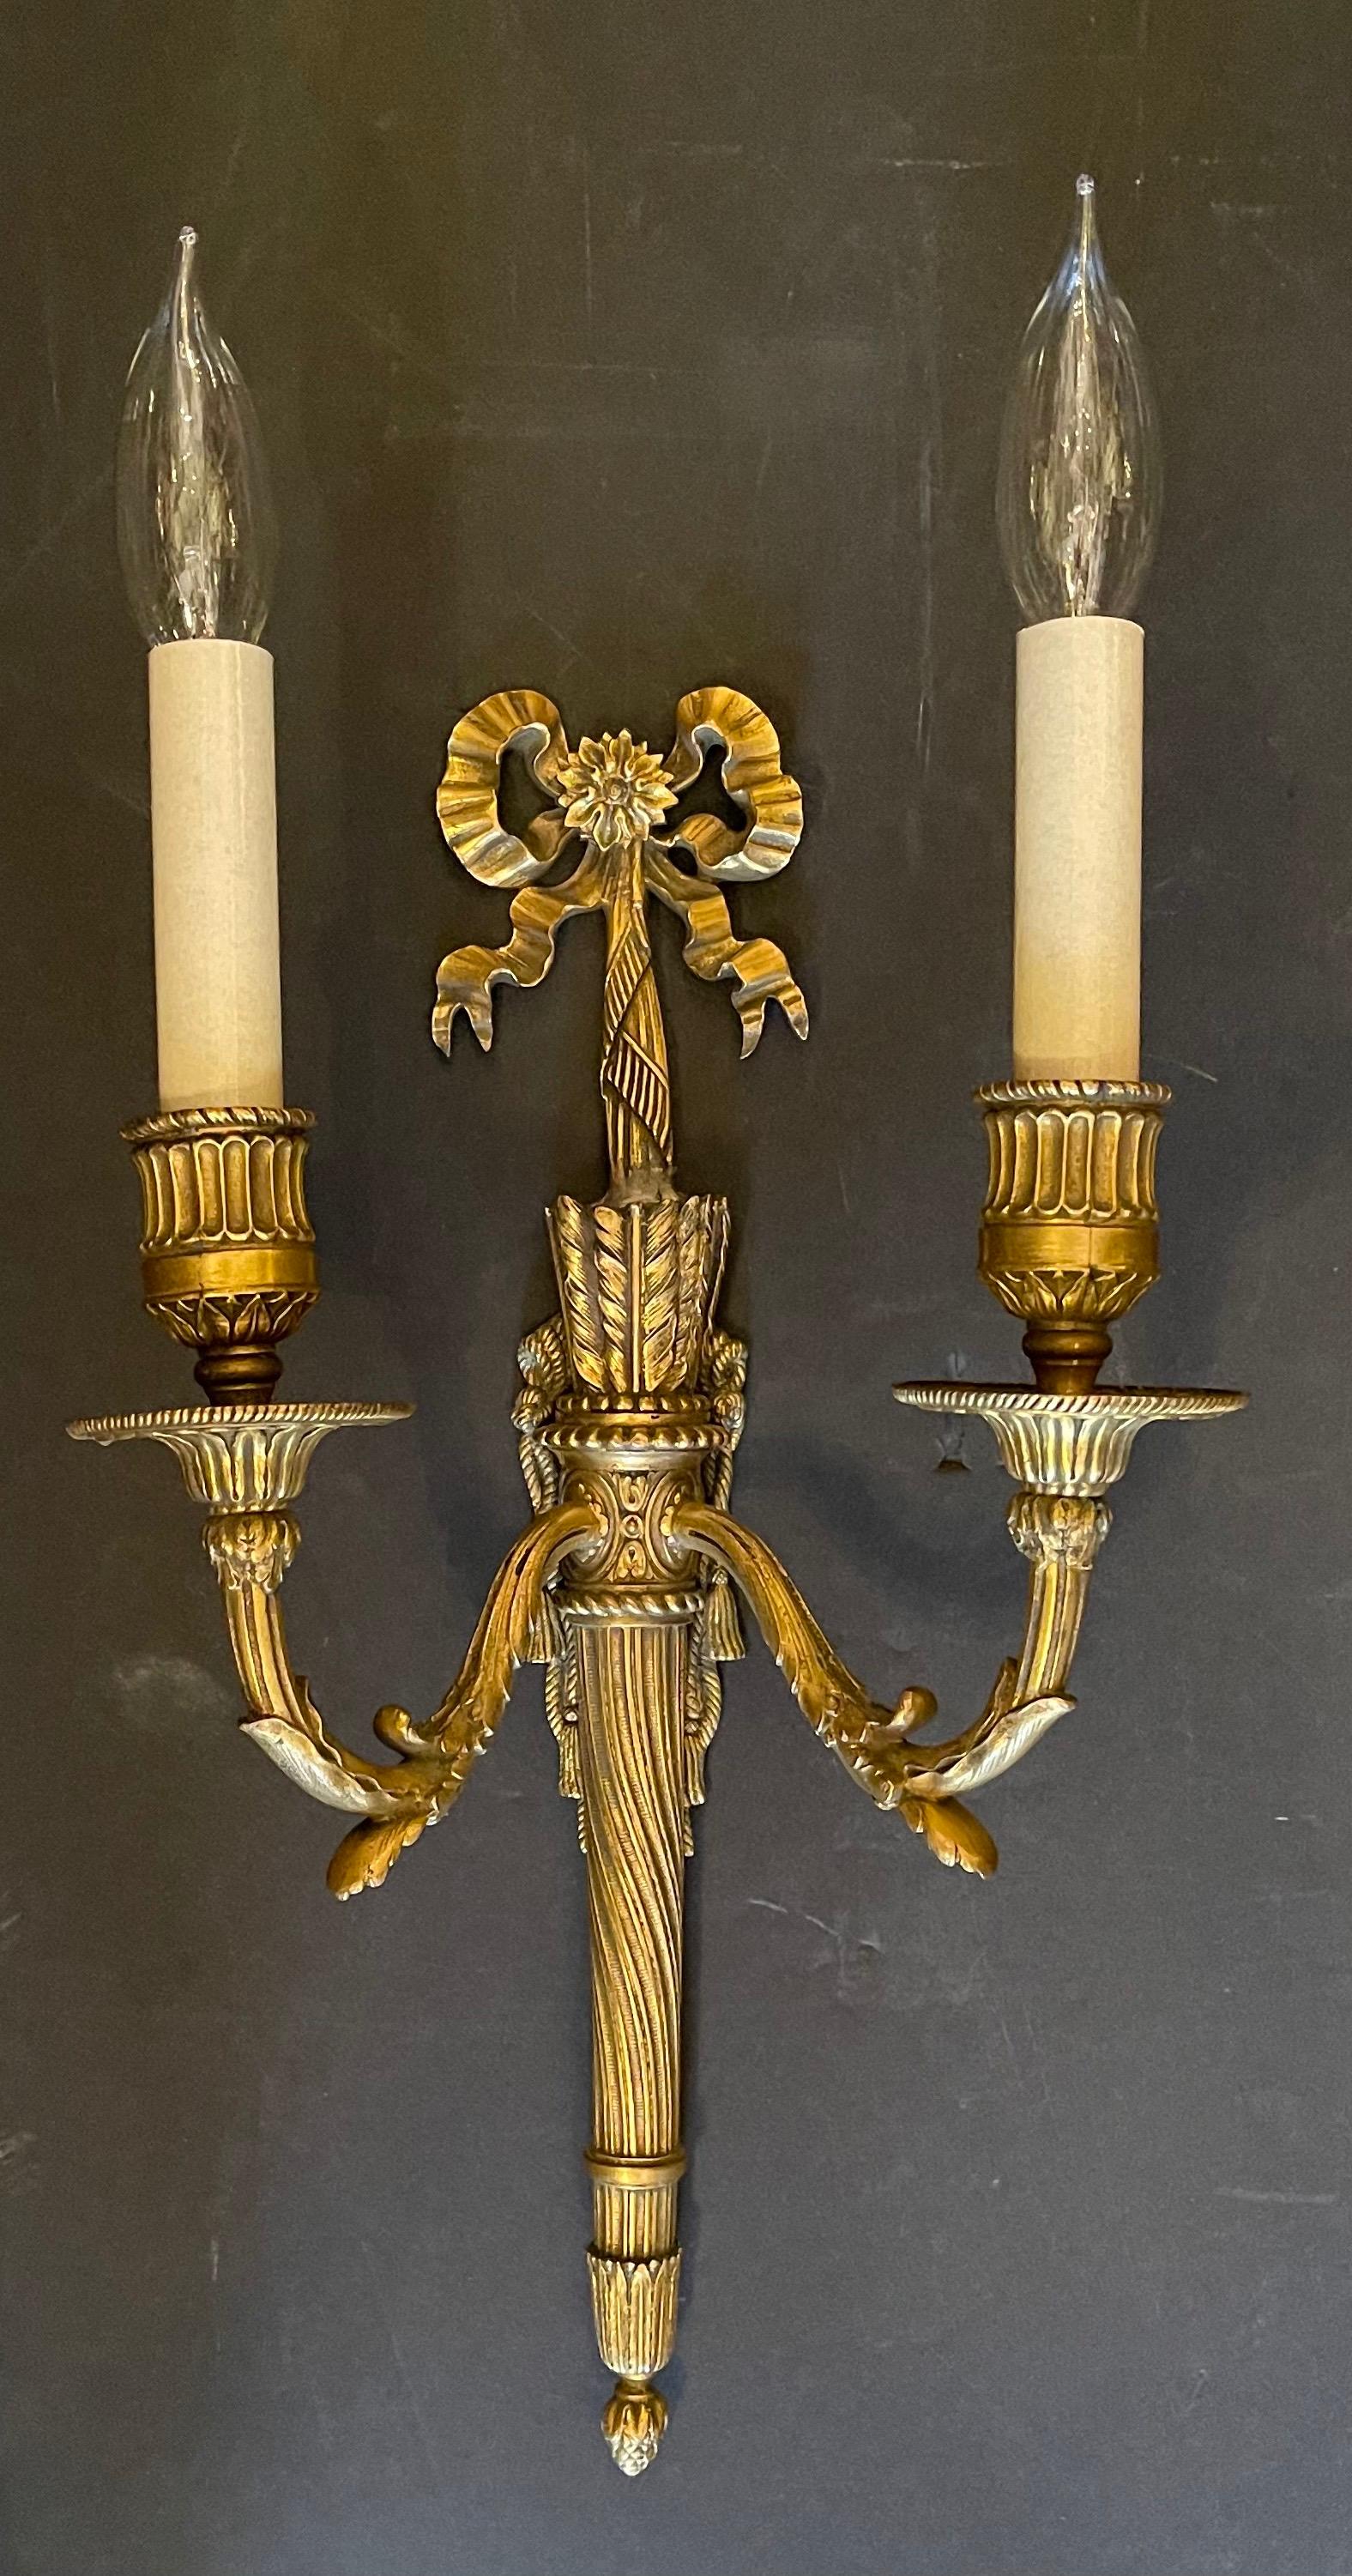 Neoclassical Wonderful Pair French Gilt Doré Bronze Bow Torchiere Caldwell Two-Light Sconces For Sale